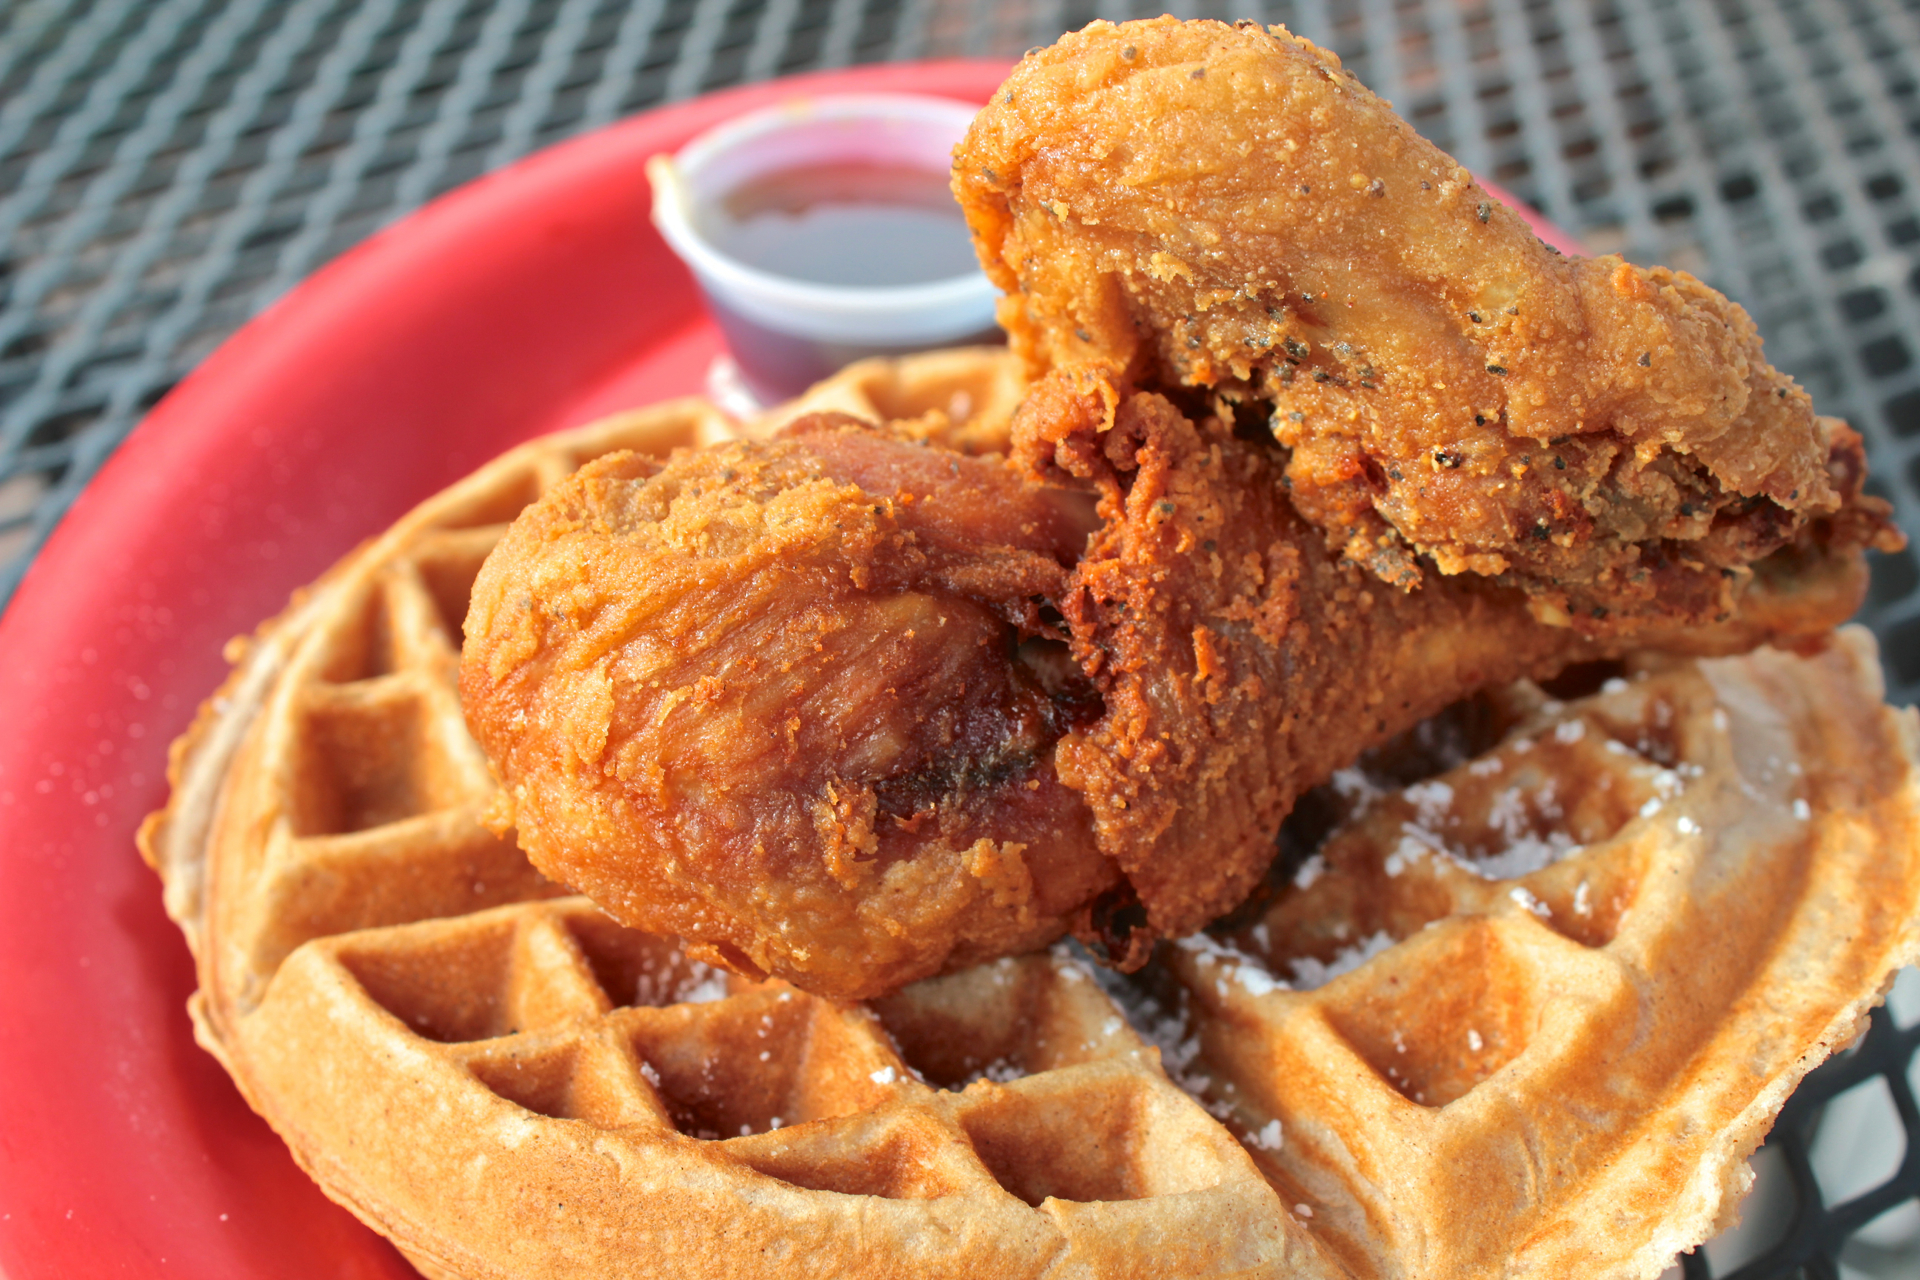 Southern fried chicken and waffles at Lillie Mae’s House of Chicken and Wafflez.